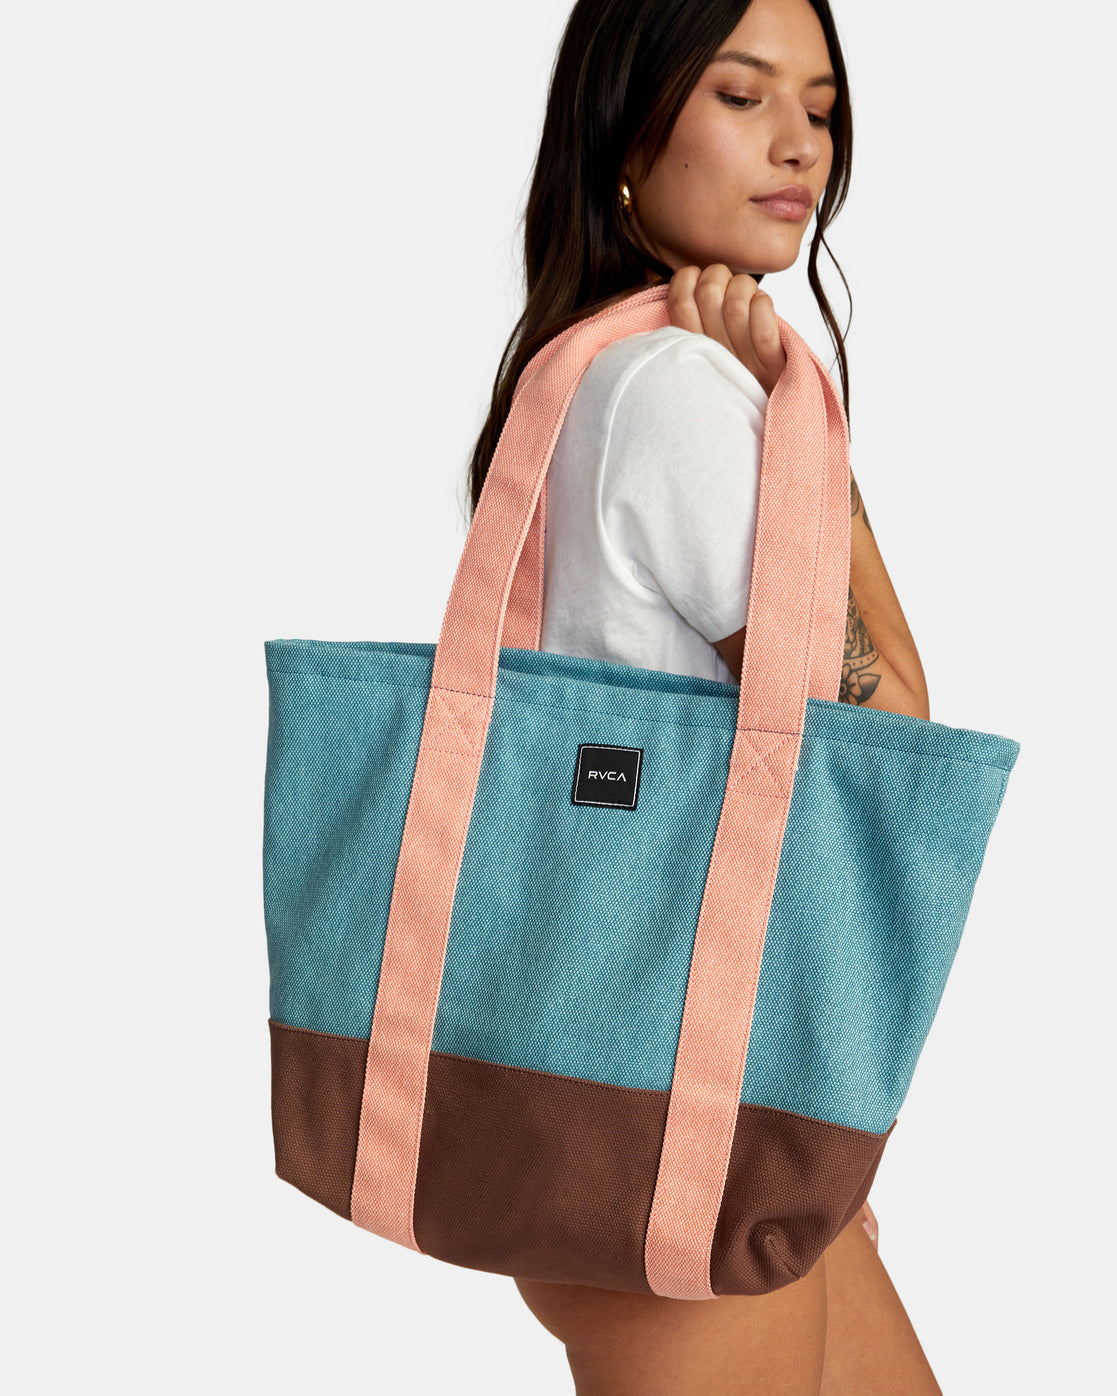 RVCA Carry All Canvas Tote Bag